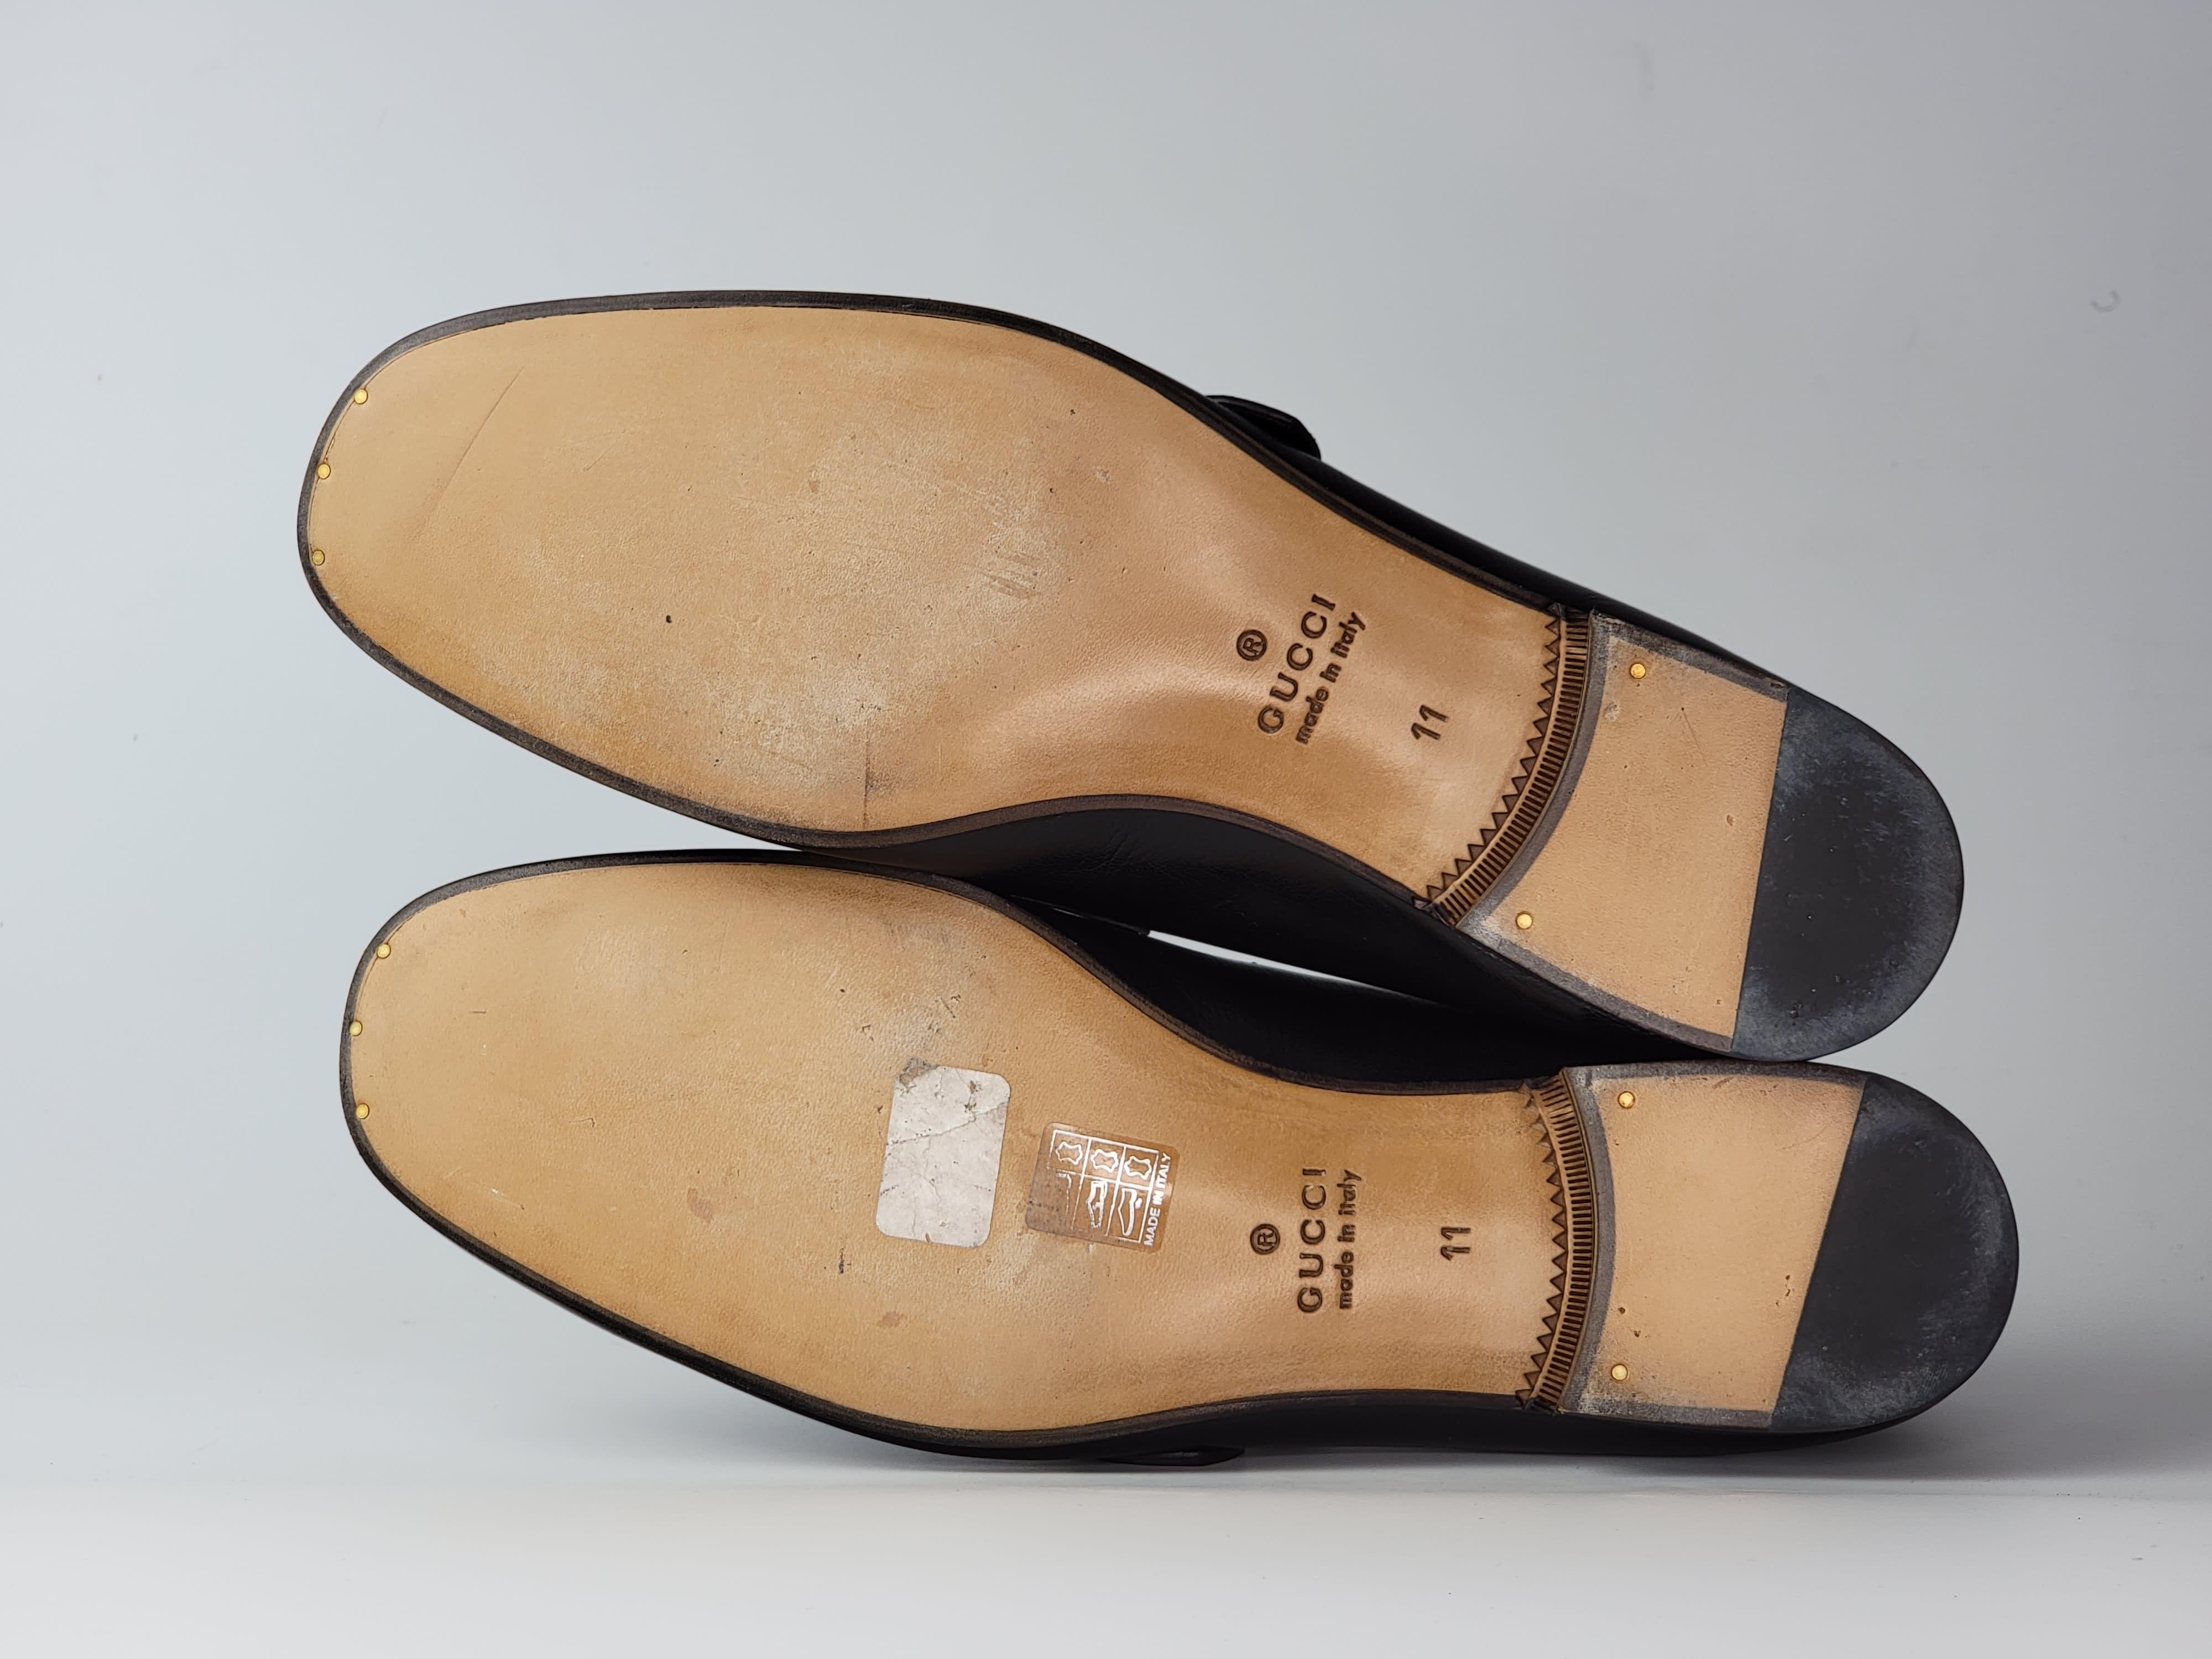 Gucci Loafers made with black leather and feature a slim shape, slightly elongated toe, silver-toned double G hardware and a leather sole. Classic shape in 1950s.

COLOR: Black
MATERIAL: Leather
ITEM CODE: 450853
SIZE: 44 EU / 11 US
HEEL: .5